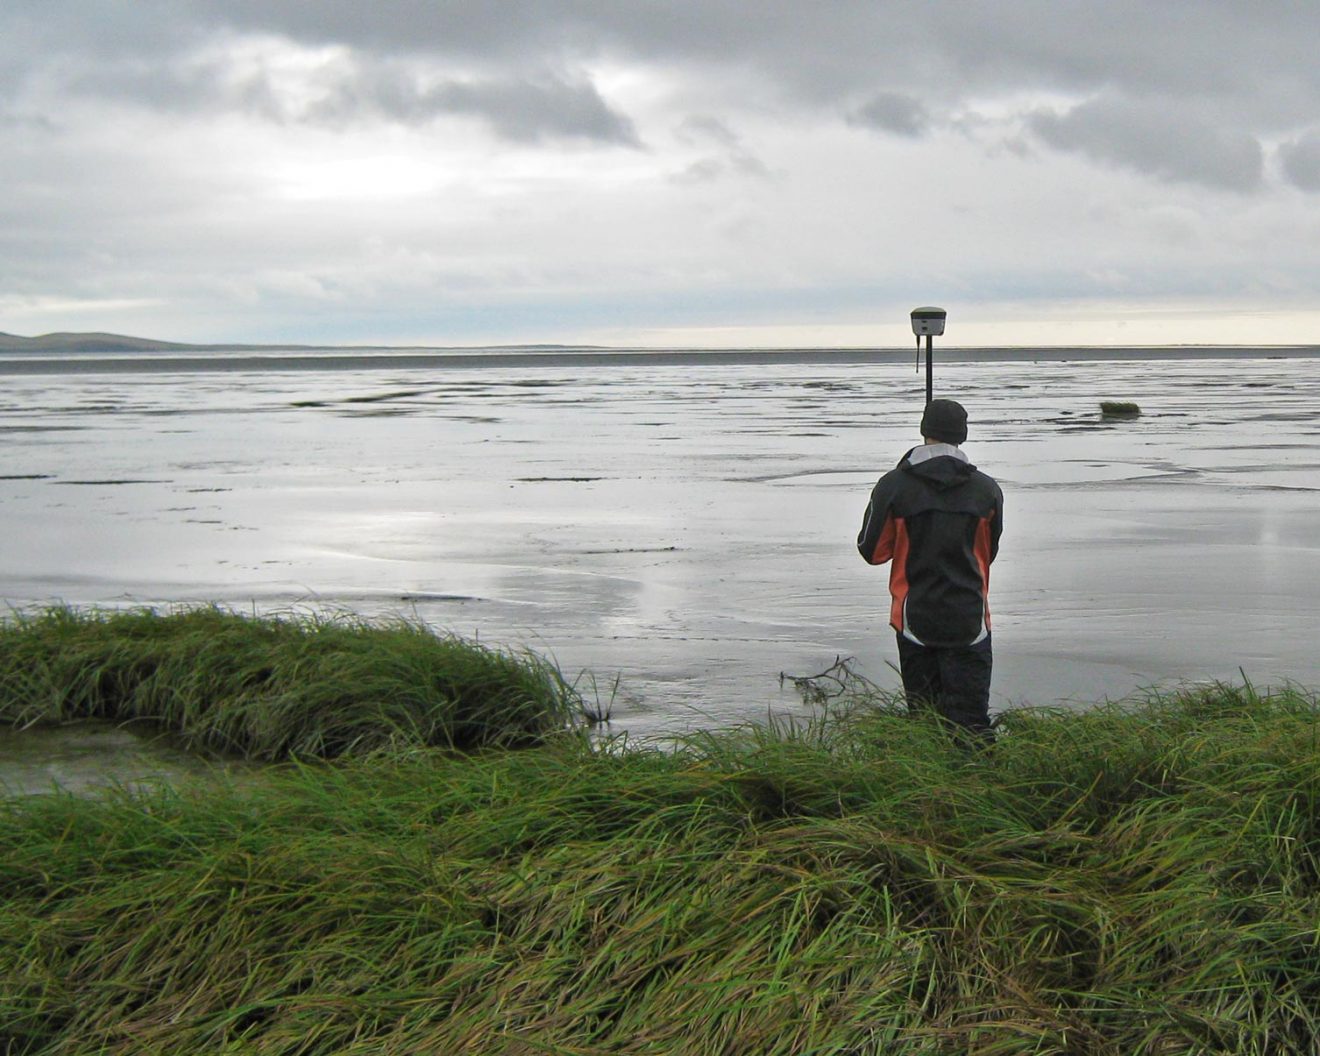 A man stands in long grass by the edge of the ocean. He is hold a tall pole with a small box attached to the top, possibly a camera or a measurement device.